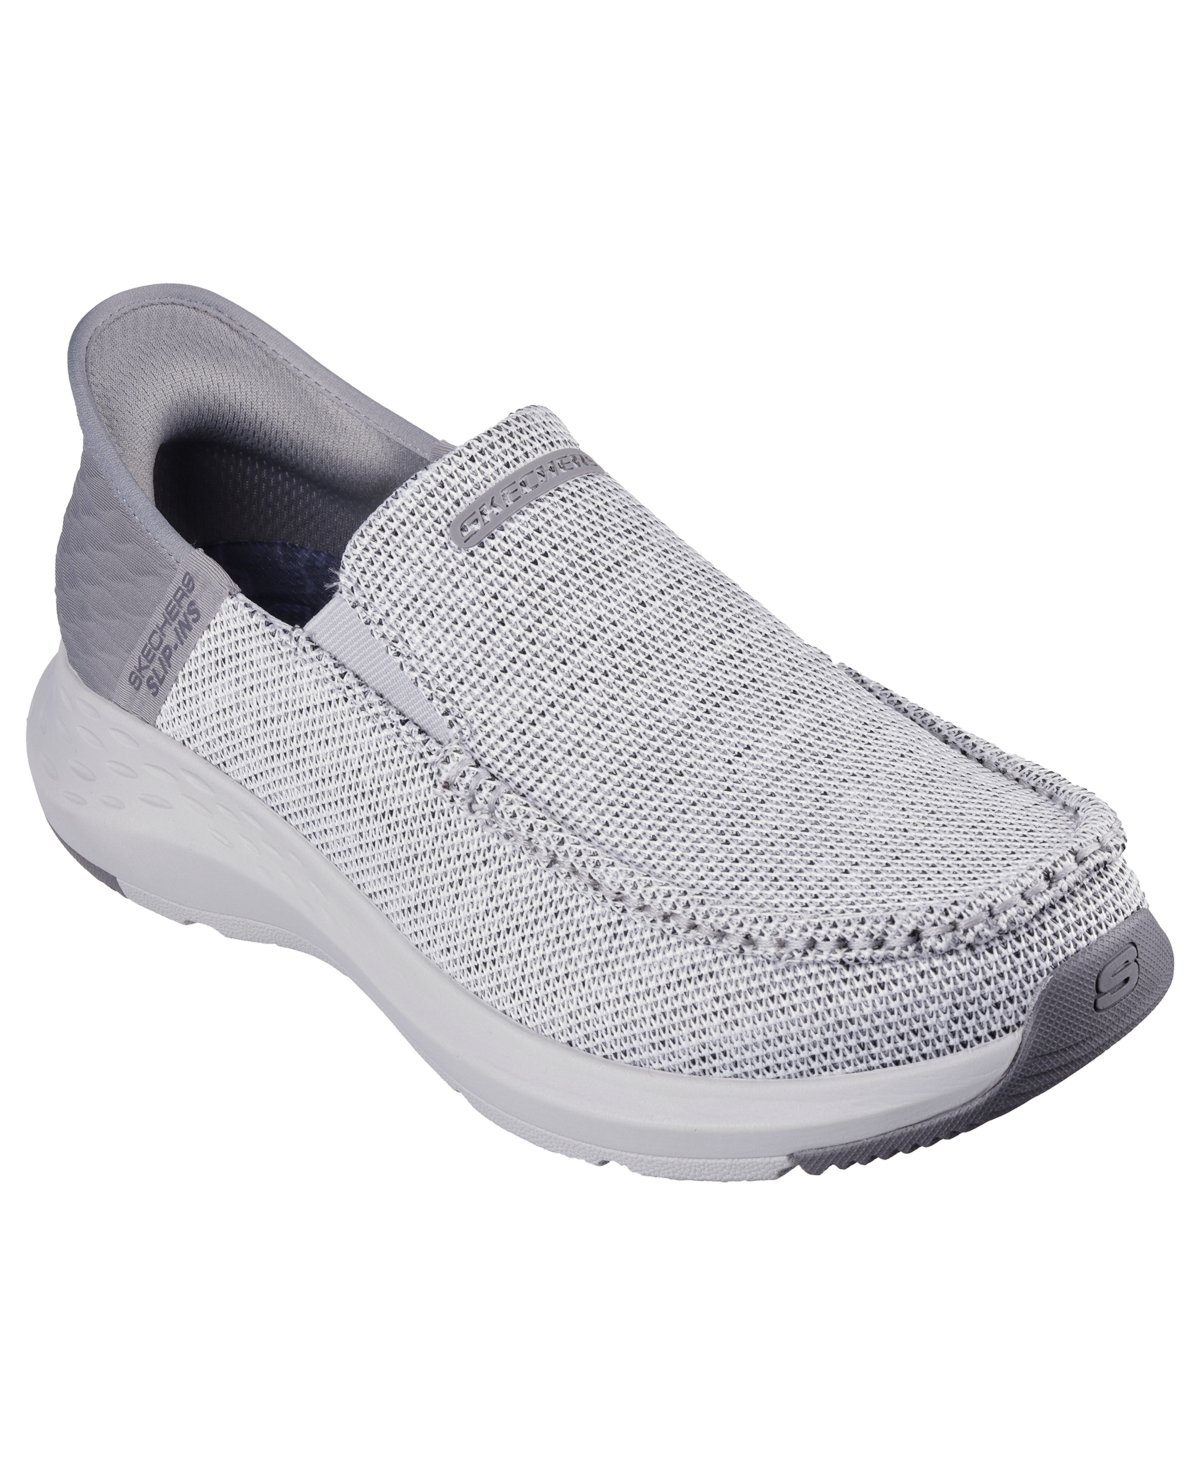 Men's Slip-ins Relaxed Fit: Parson - Mox Slip-On Moc Toe Casual Sneakers from Finish Line - Light Grey